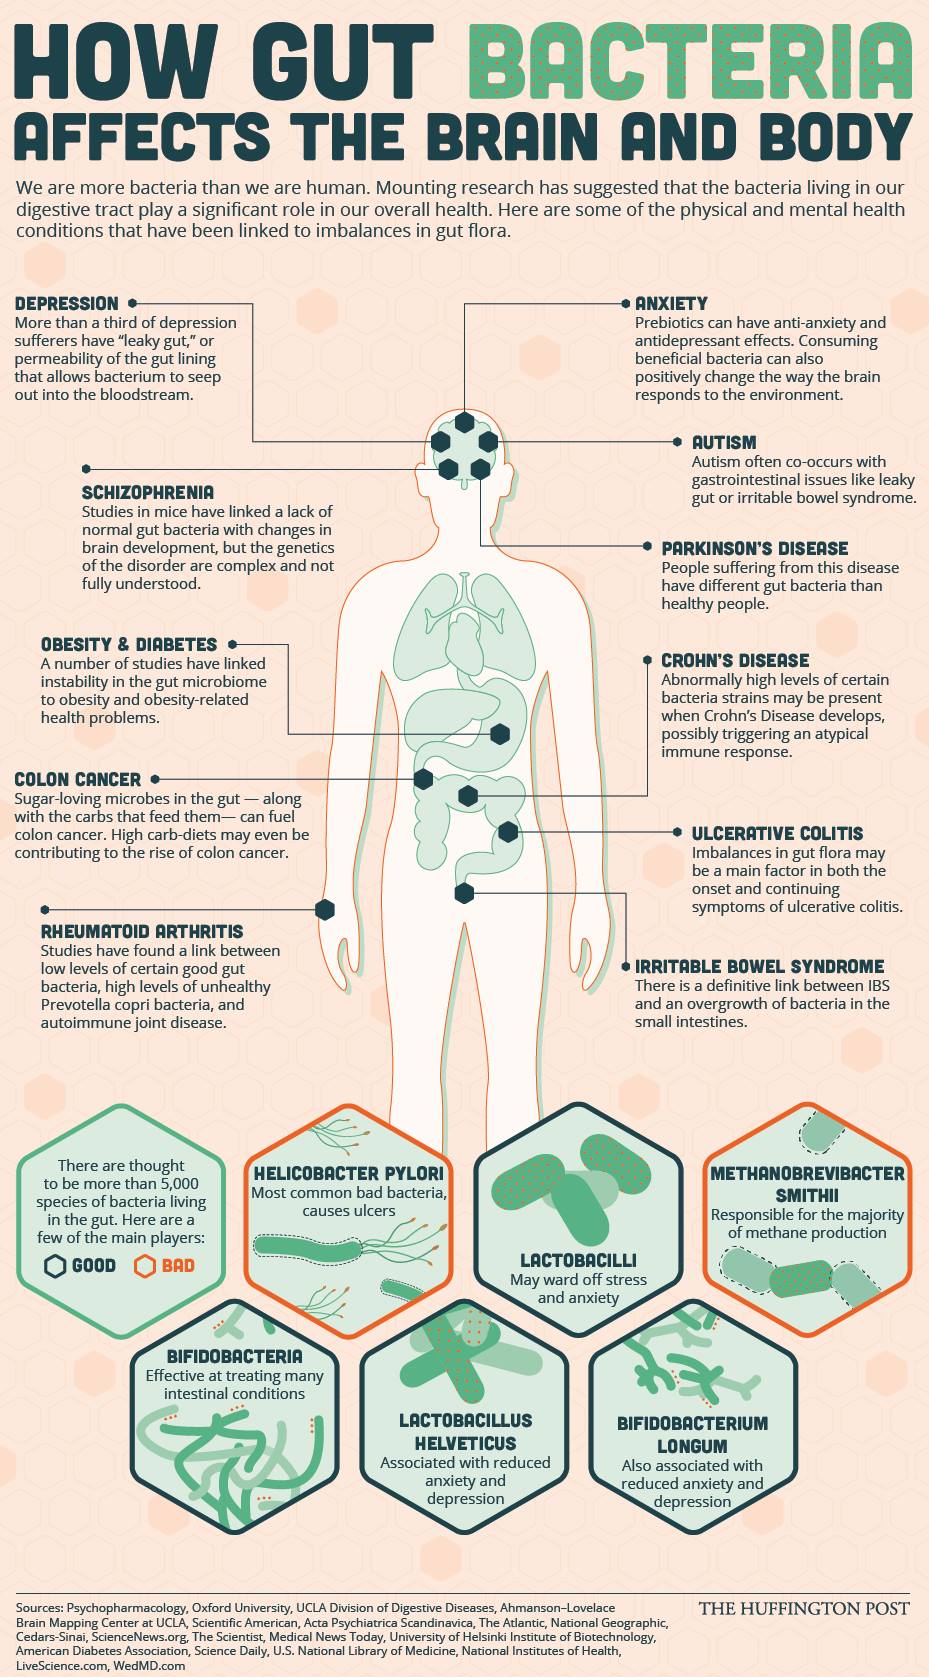 how gut bacteria affects the brain and body, infographic